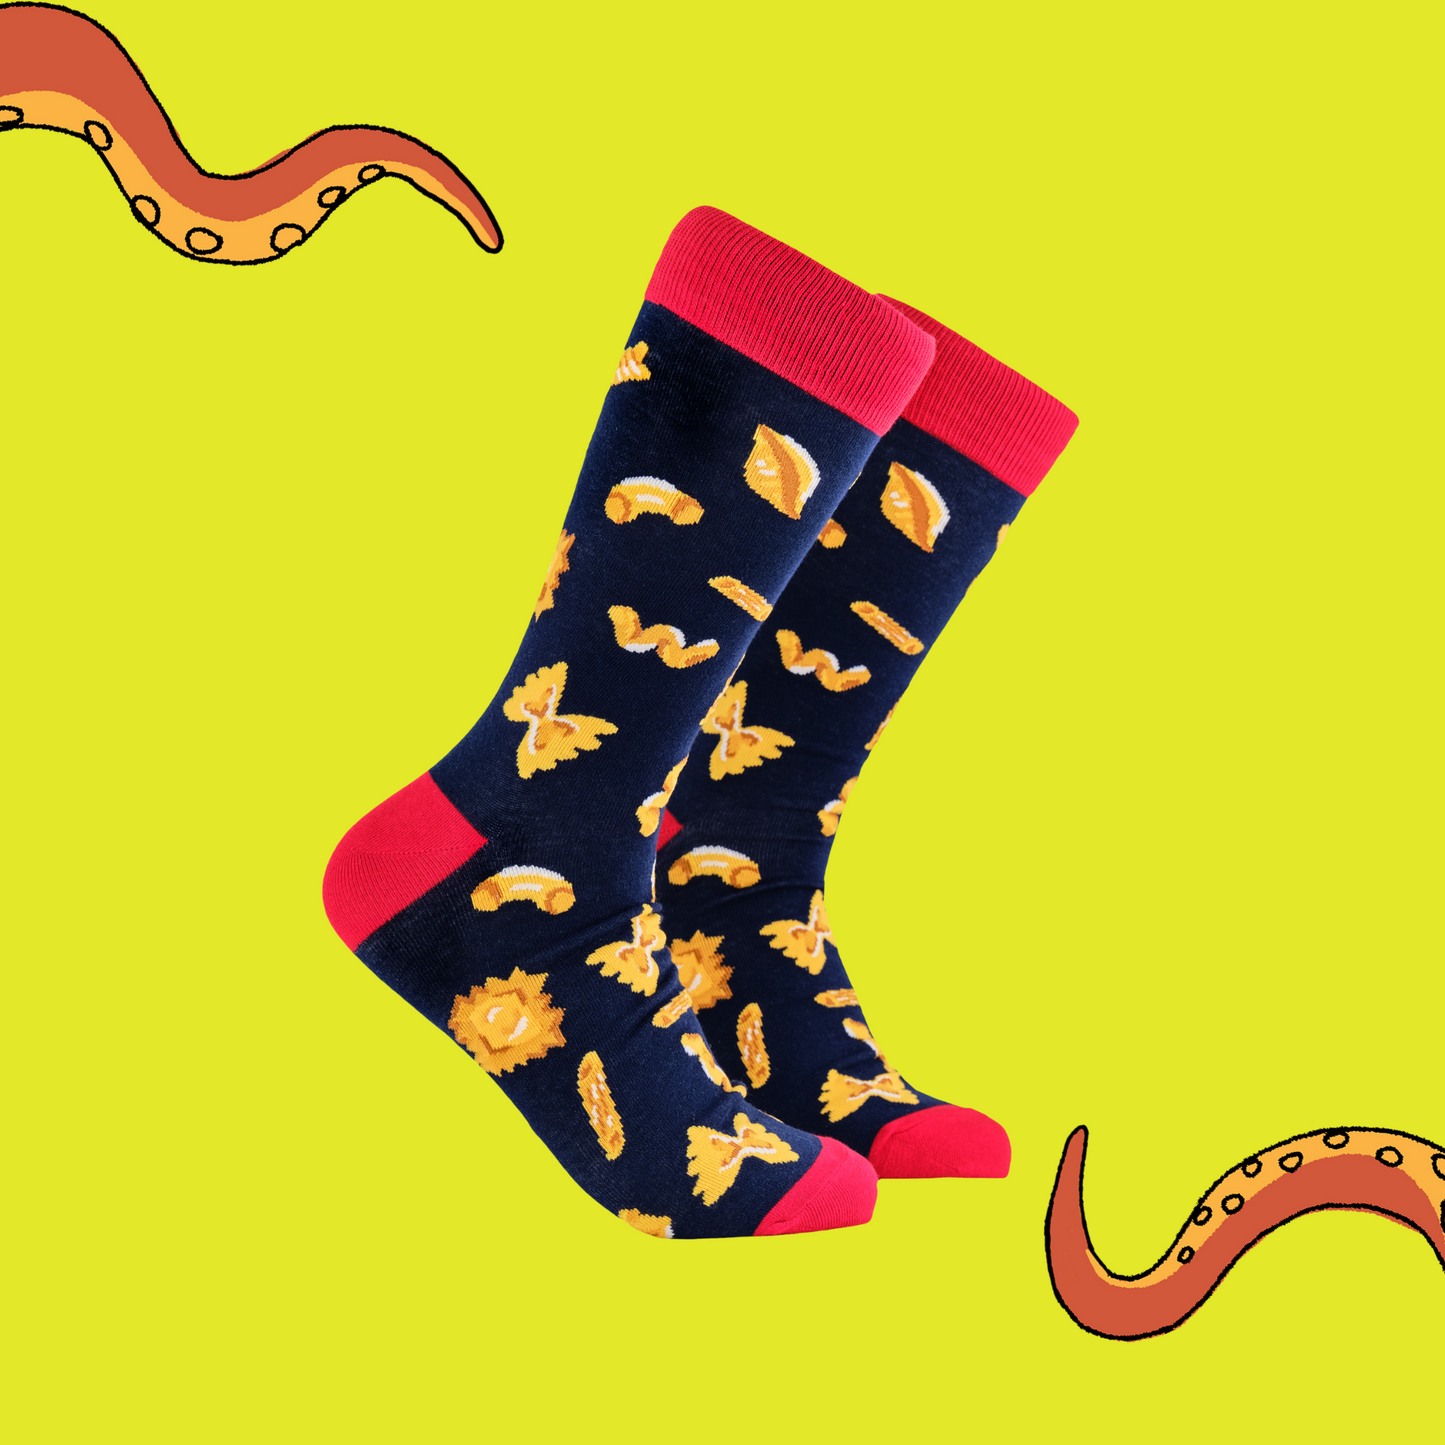 A pair of socks depicting different pasta shapes. Dark blue legs, red cuff, heel and toe.